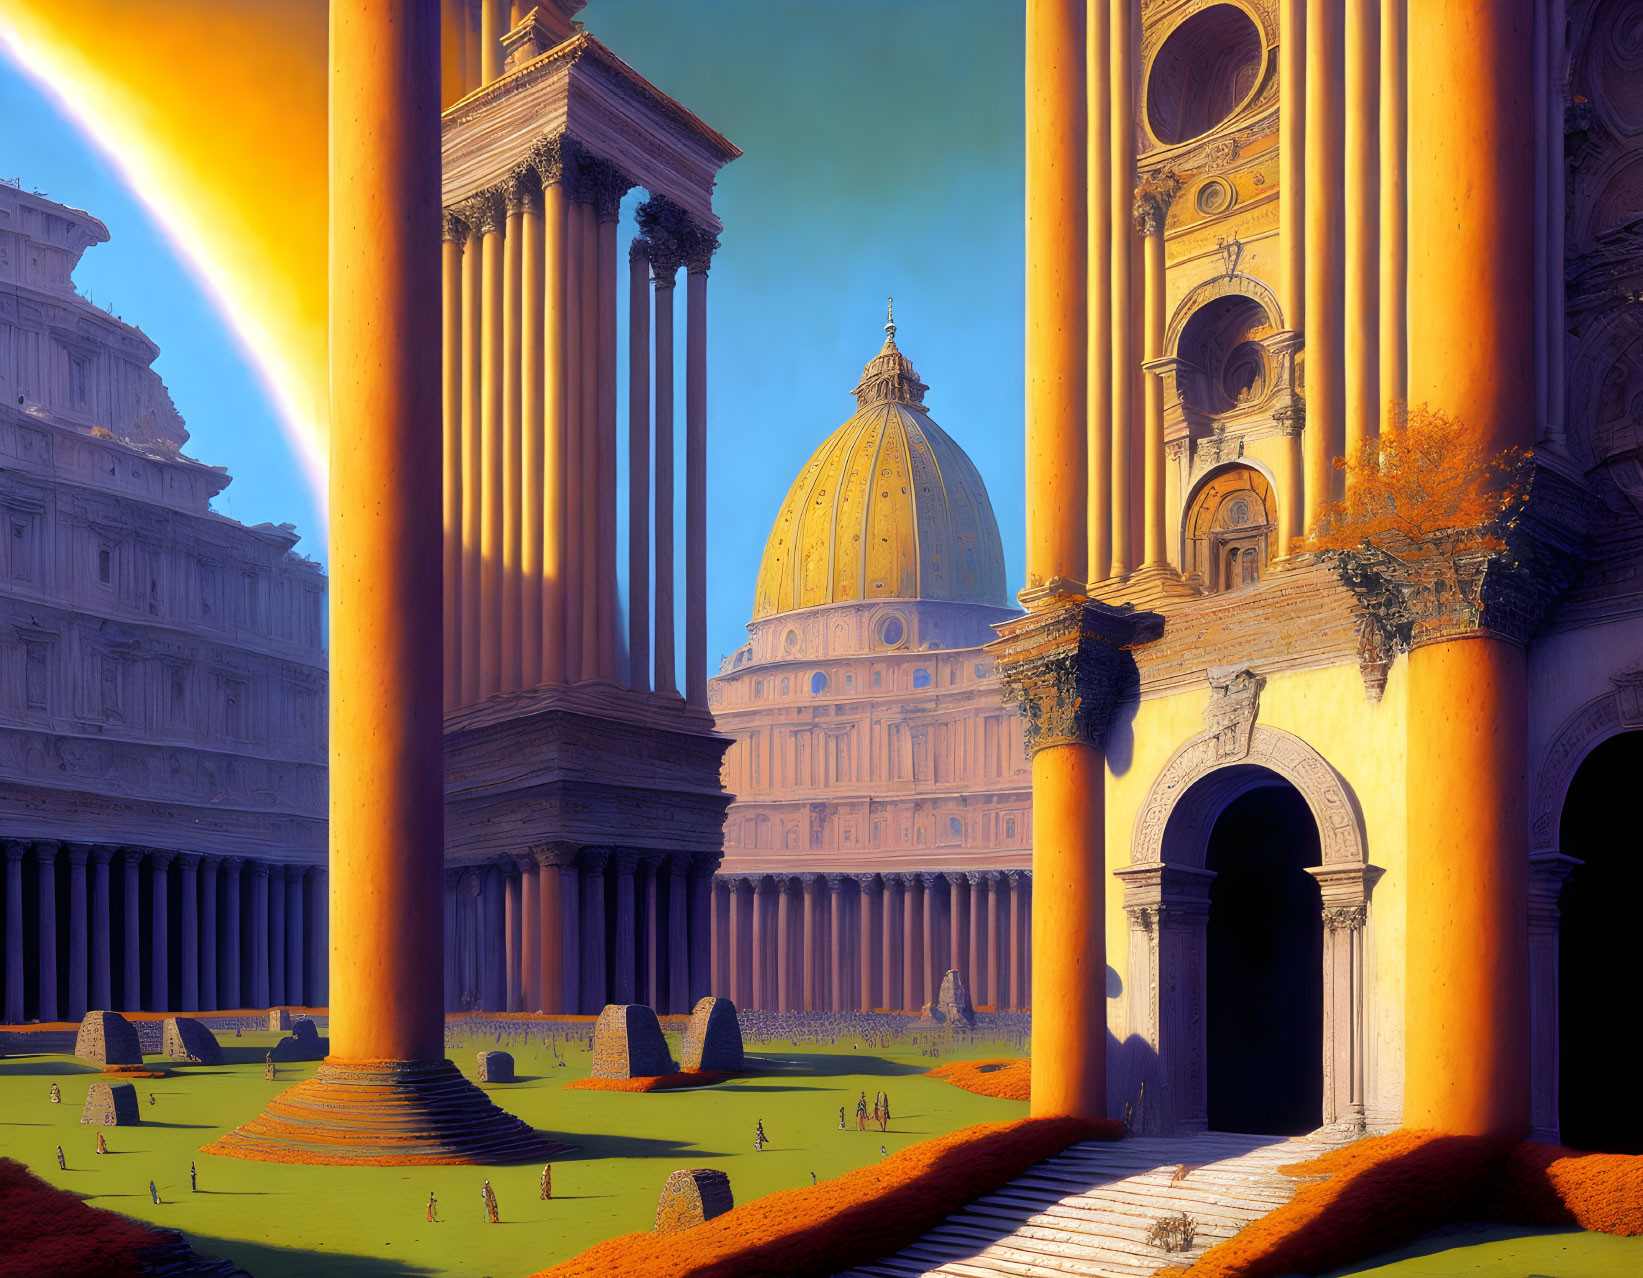 Surreal landscape with dome, pillars, and celestial line